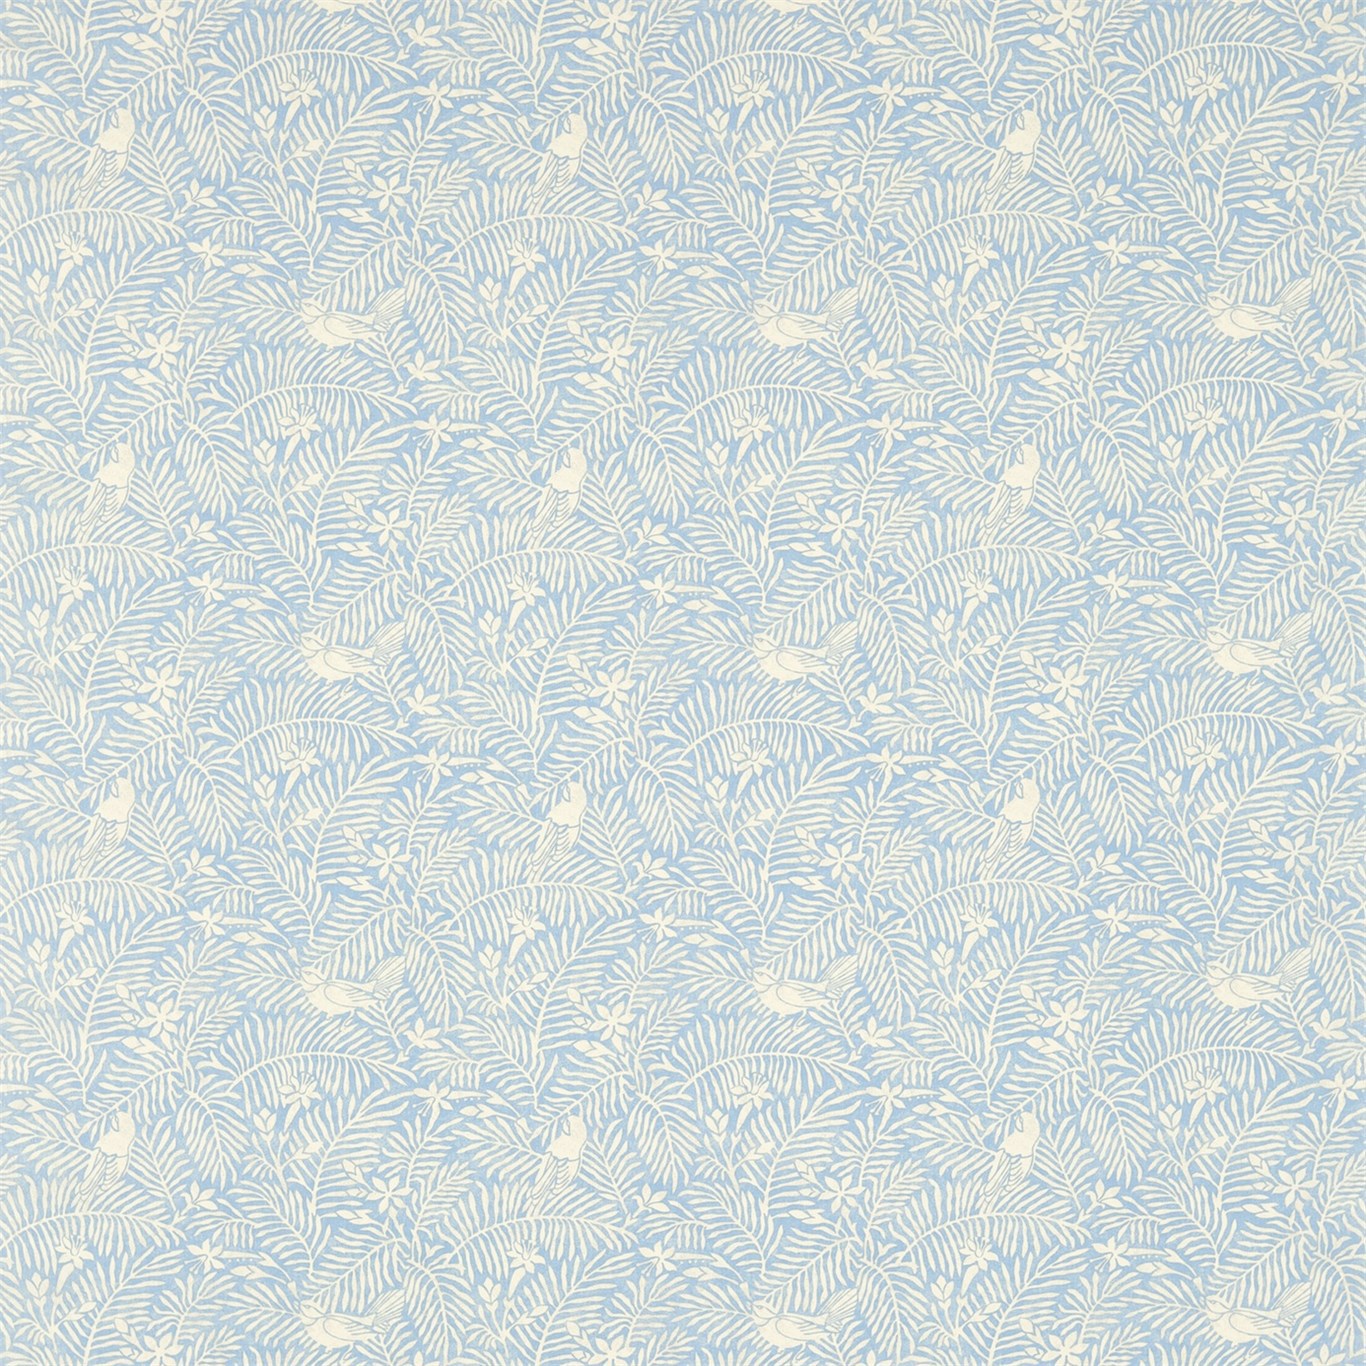 Calico Birds Mineral Blue Fabric by SAN